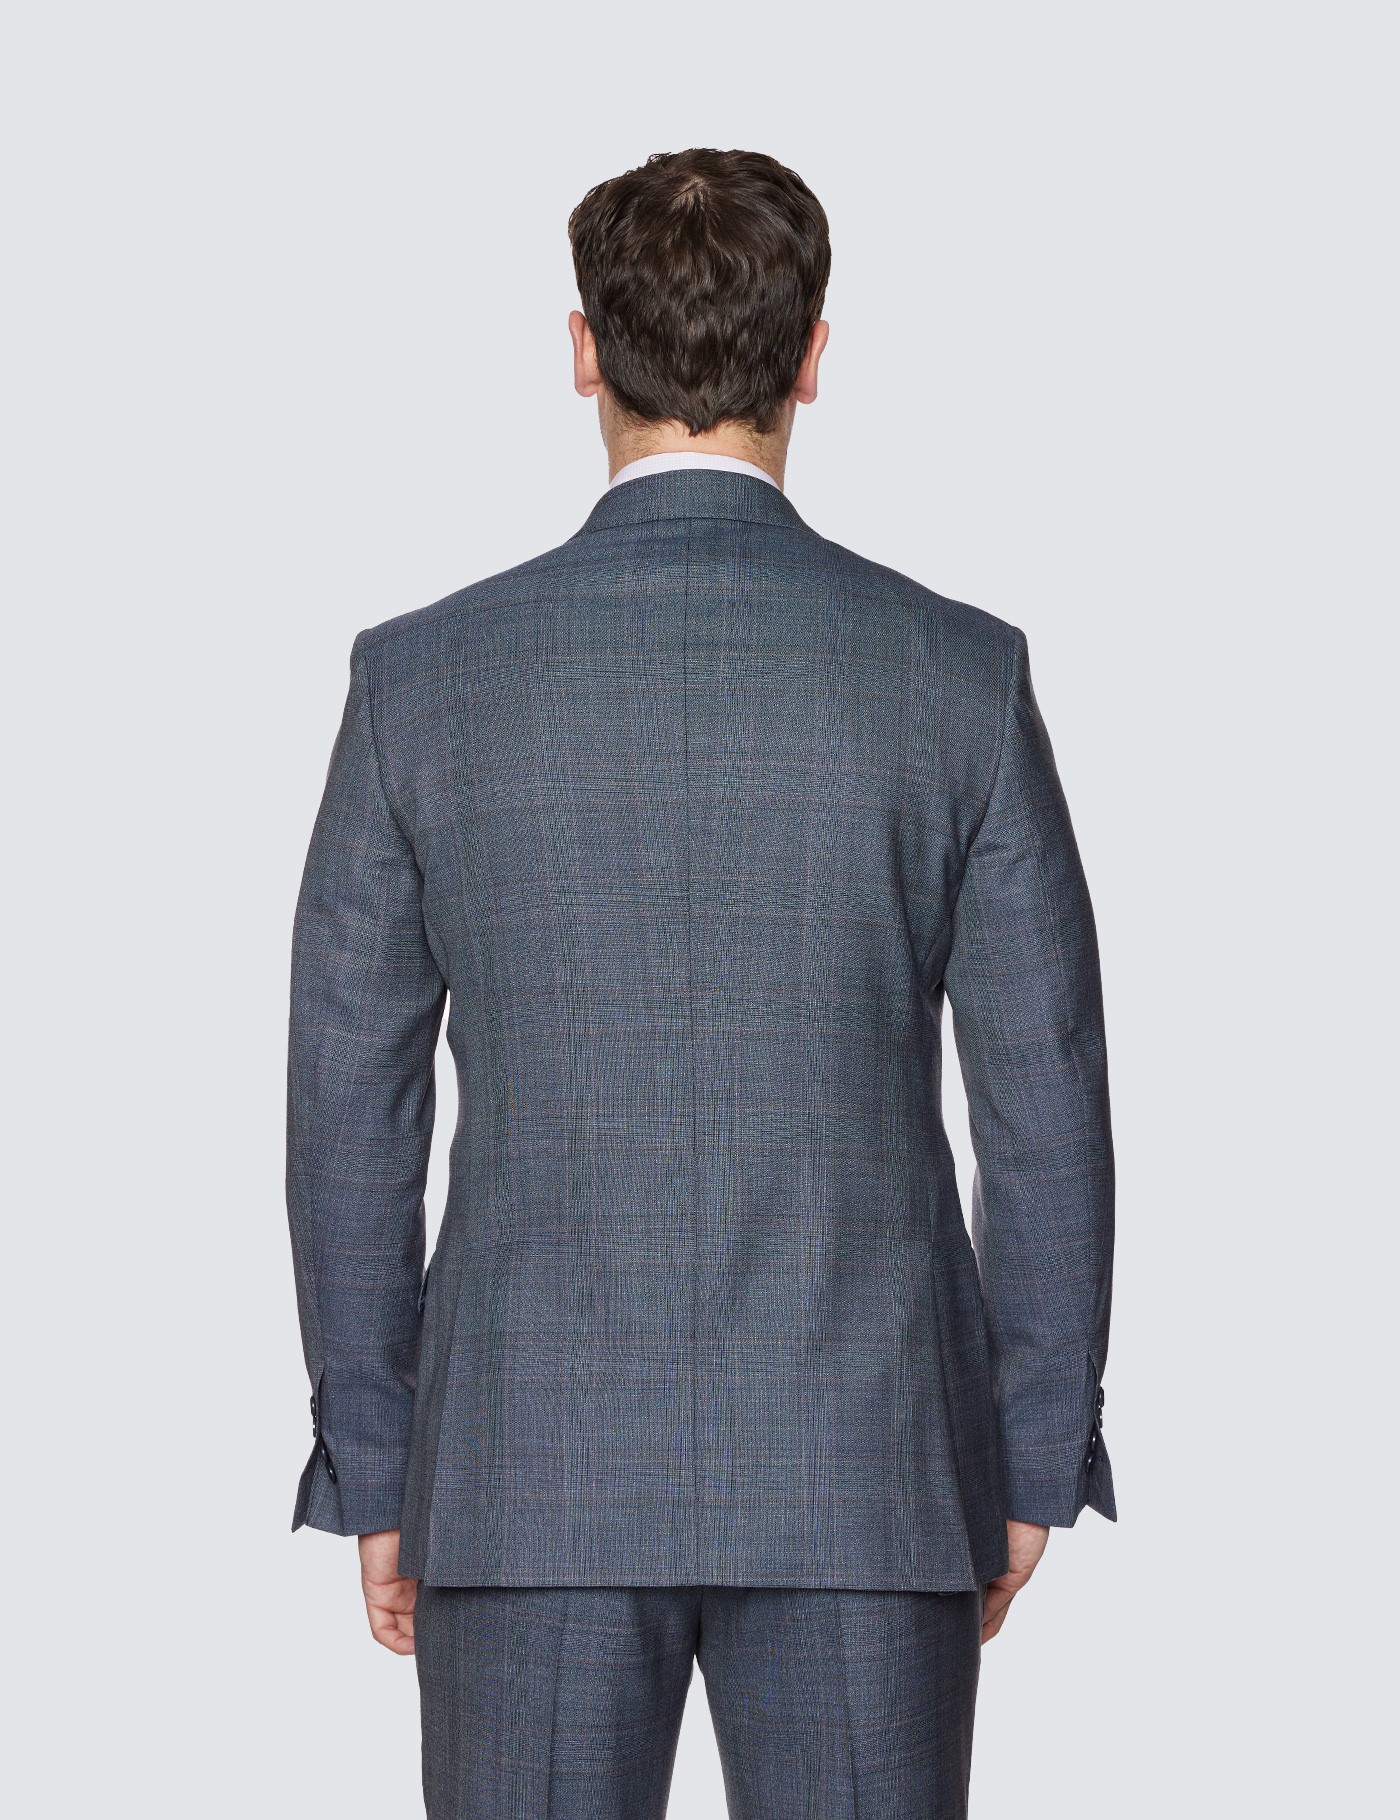 Men's Grey Prince Of Wales Check Tailored Fit Double Breasted Suit ...